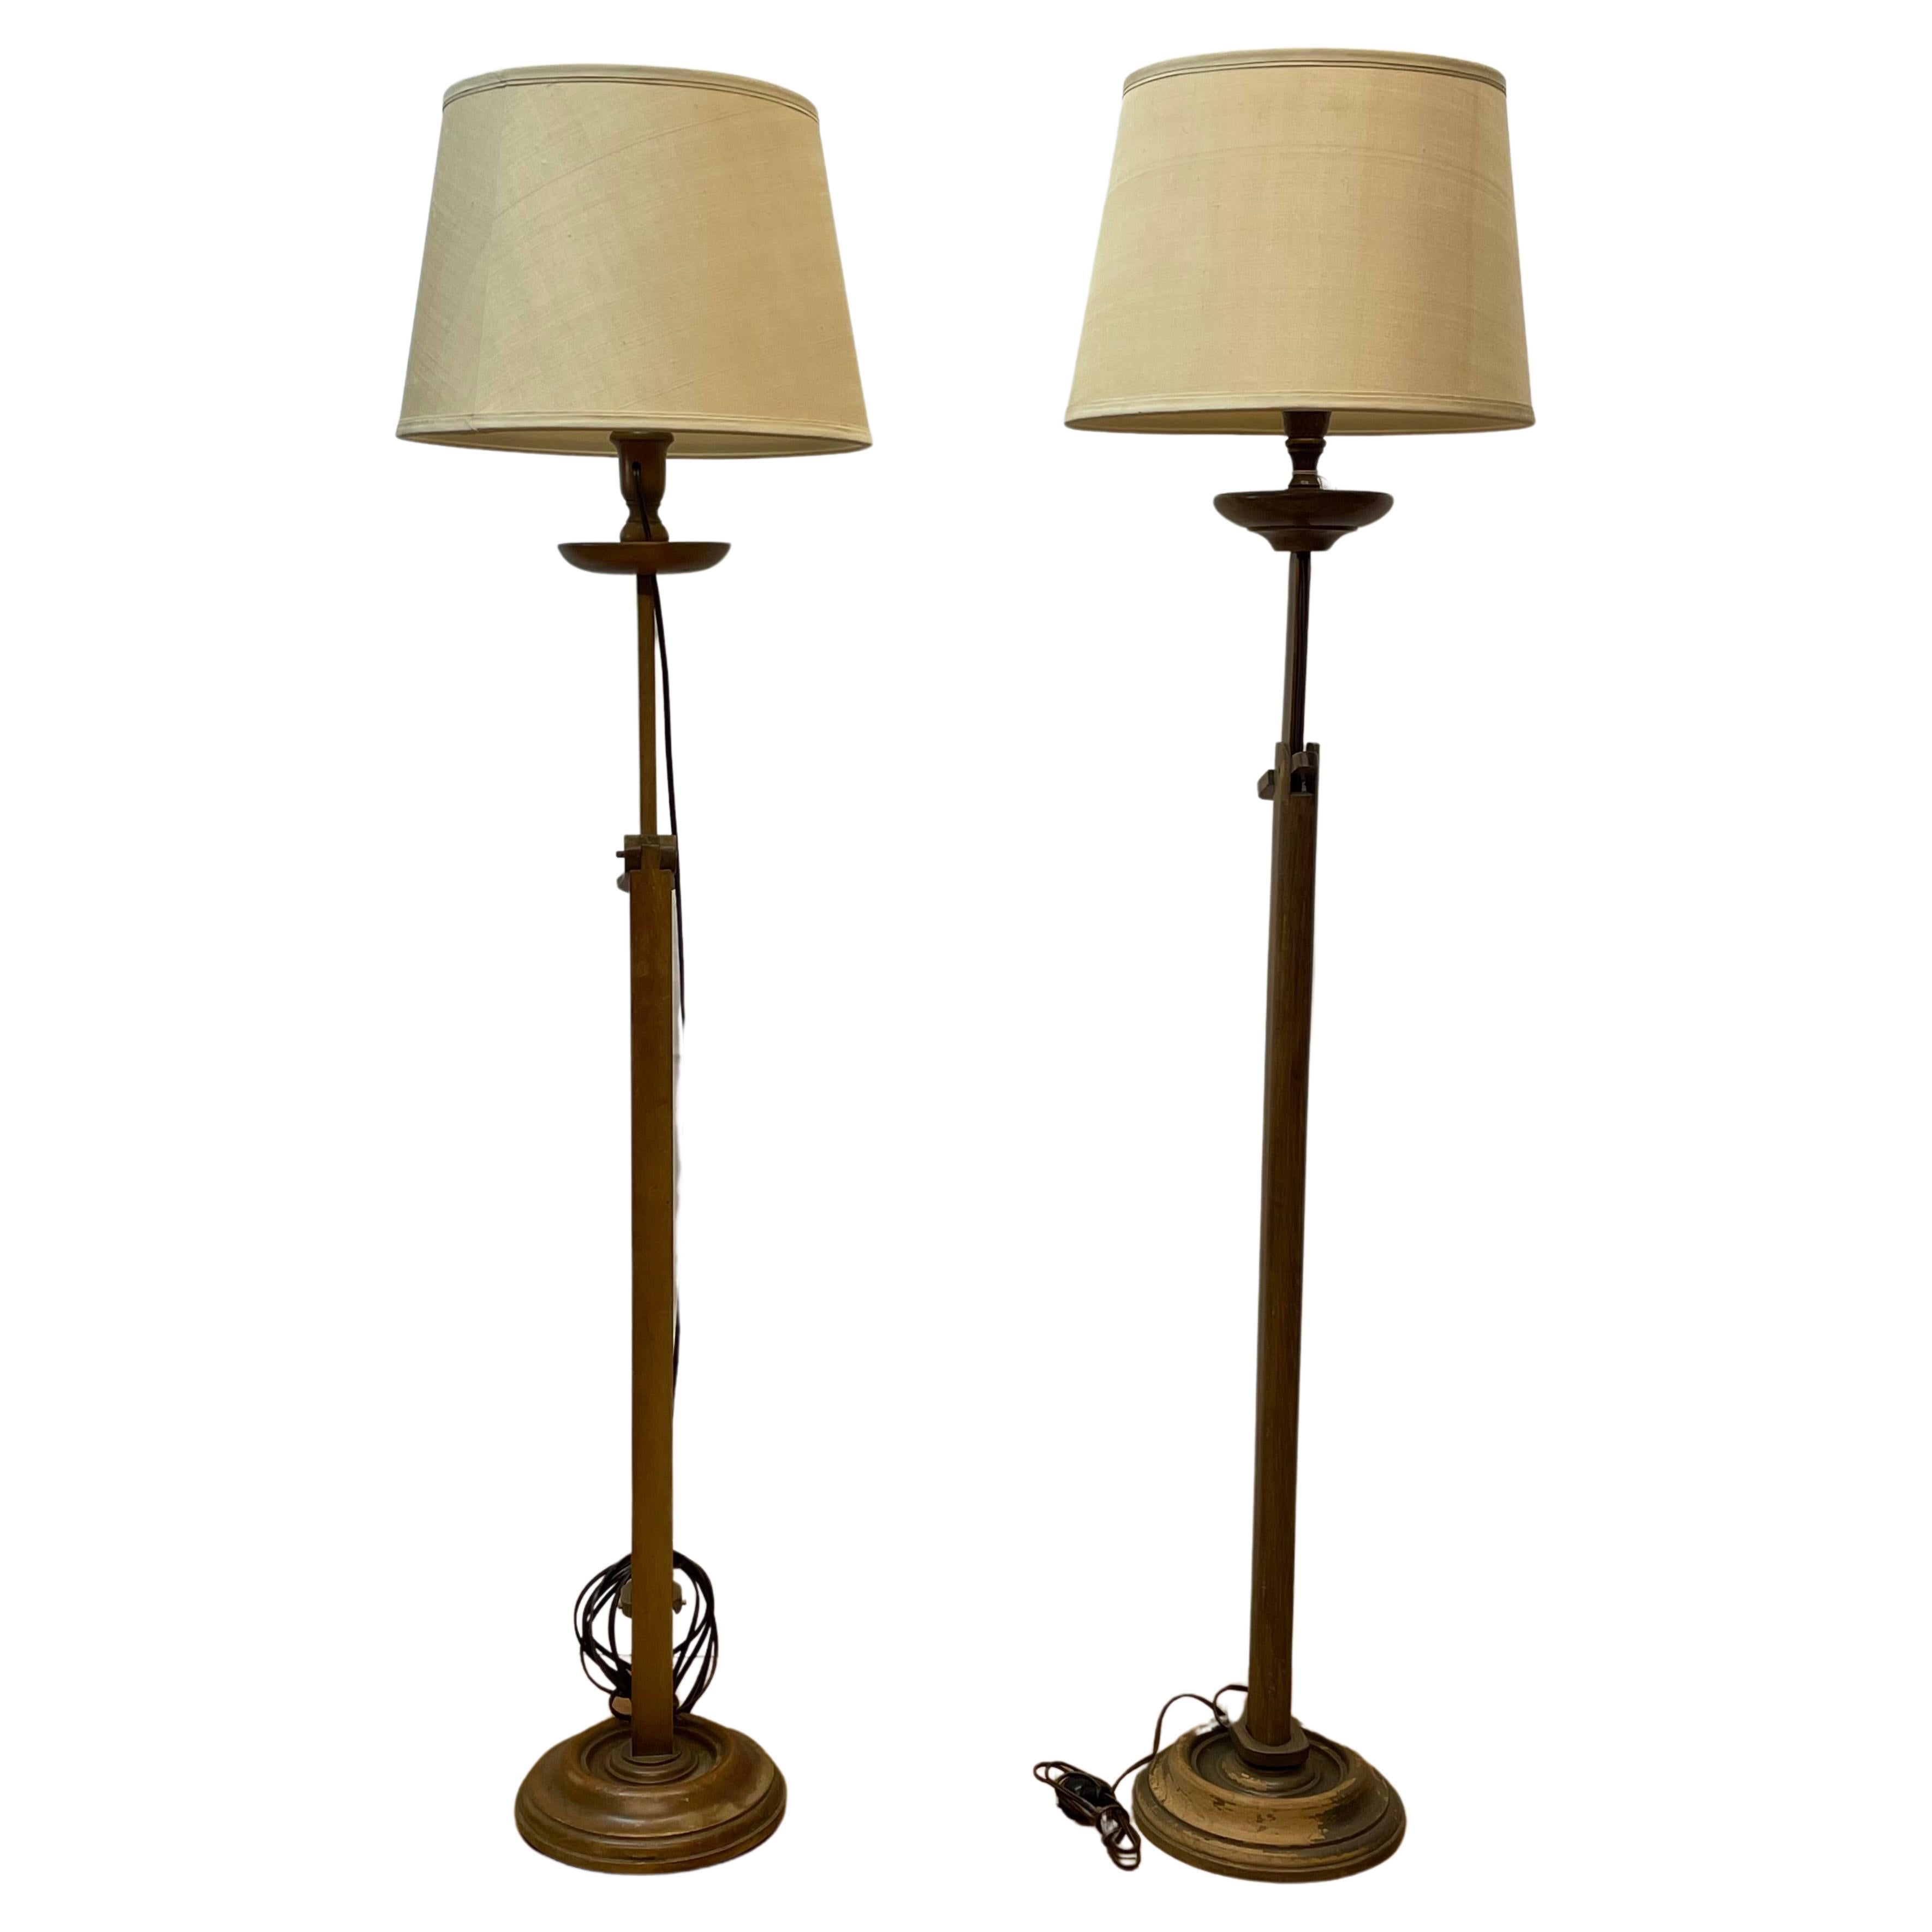 Pair of ratchet adjustable hand carved wood floor lamps with glass shades For Sale